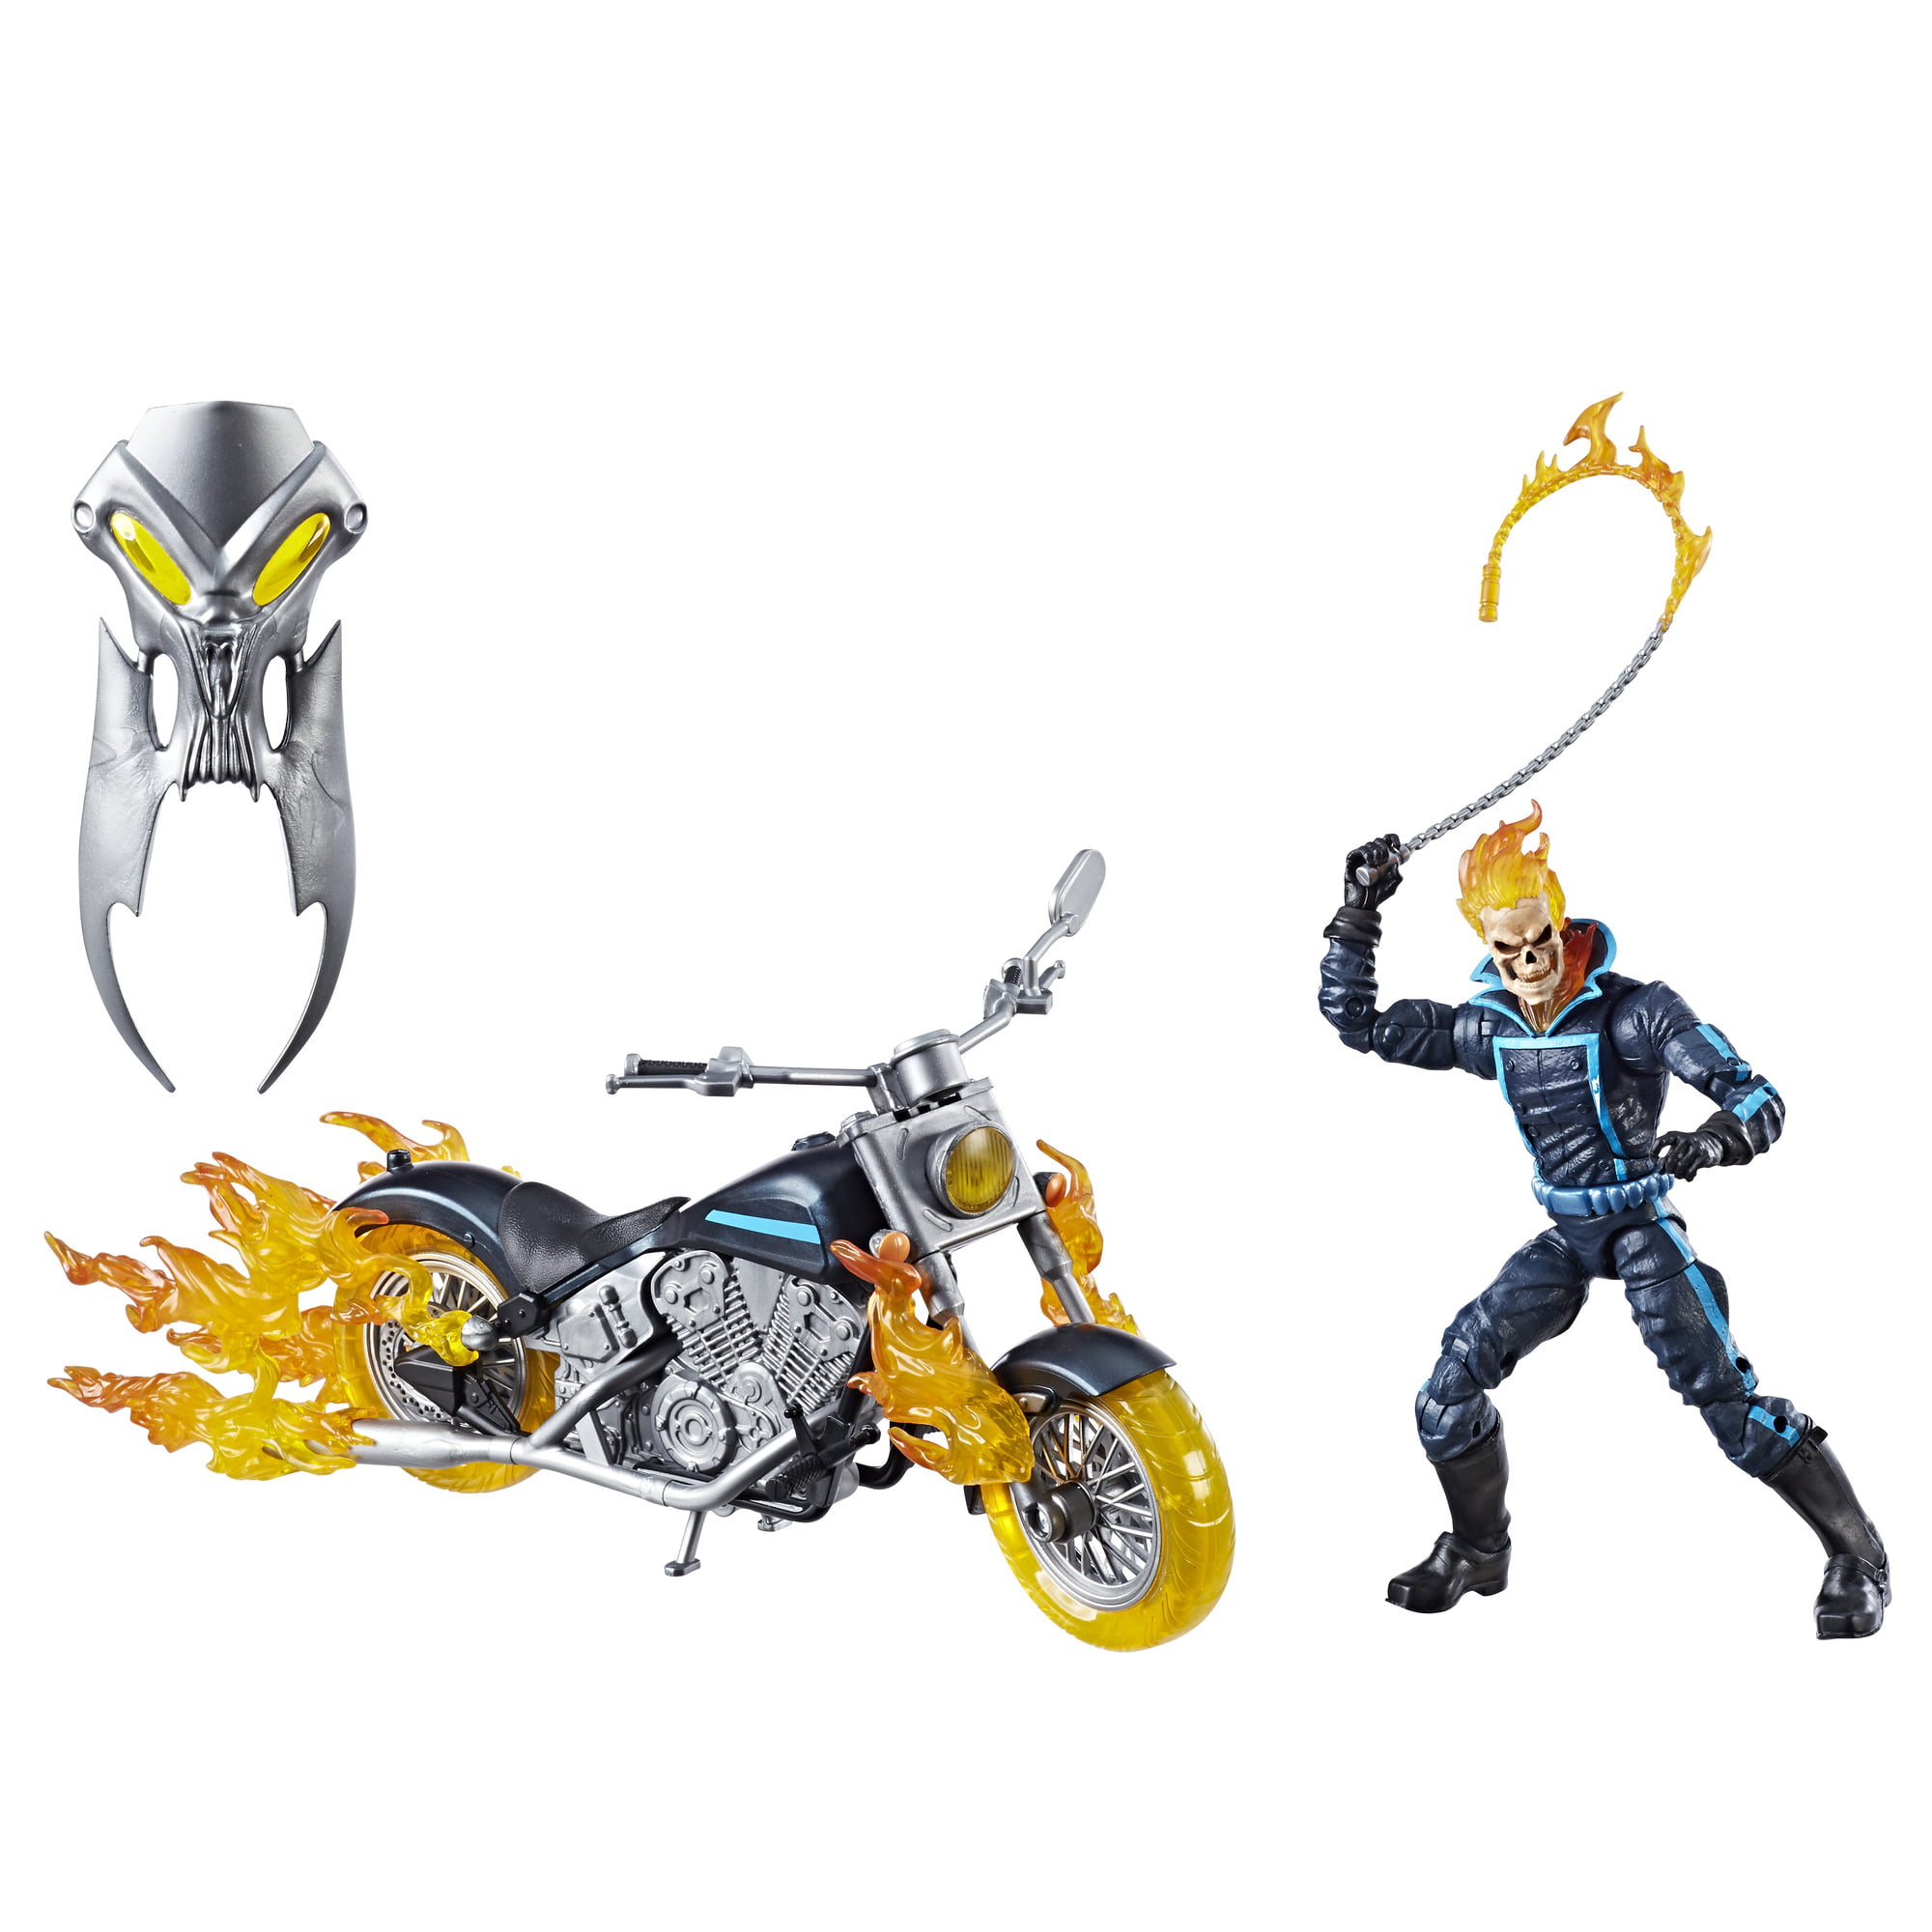 Marvel Legends Series 6-inch Ghost Rider Action Figure with Flame